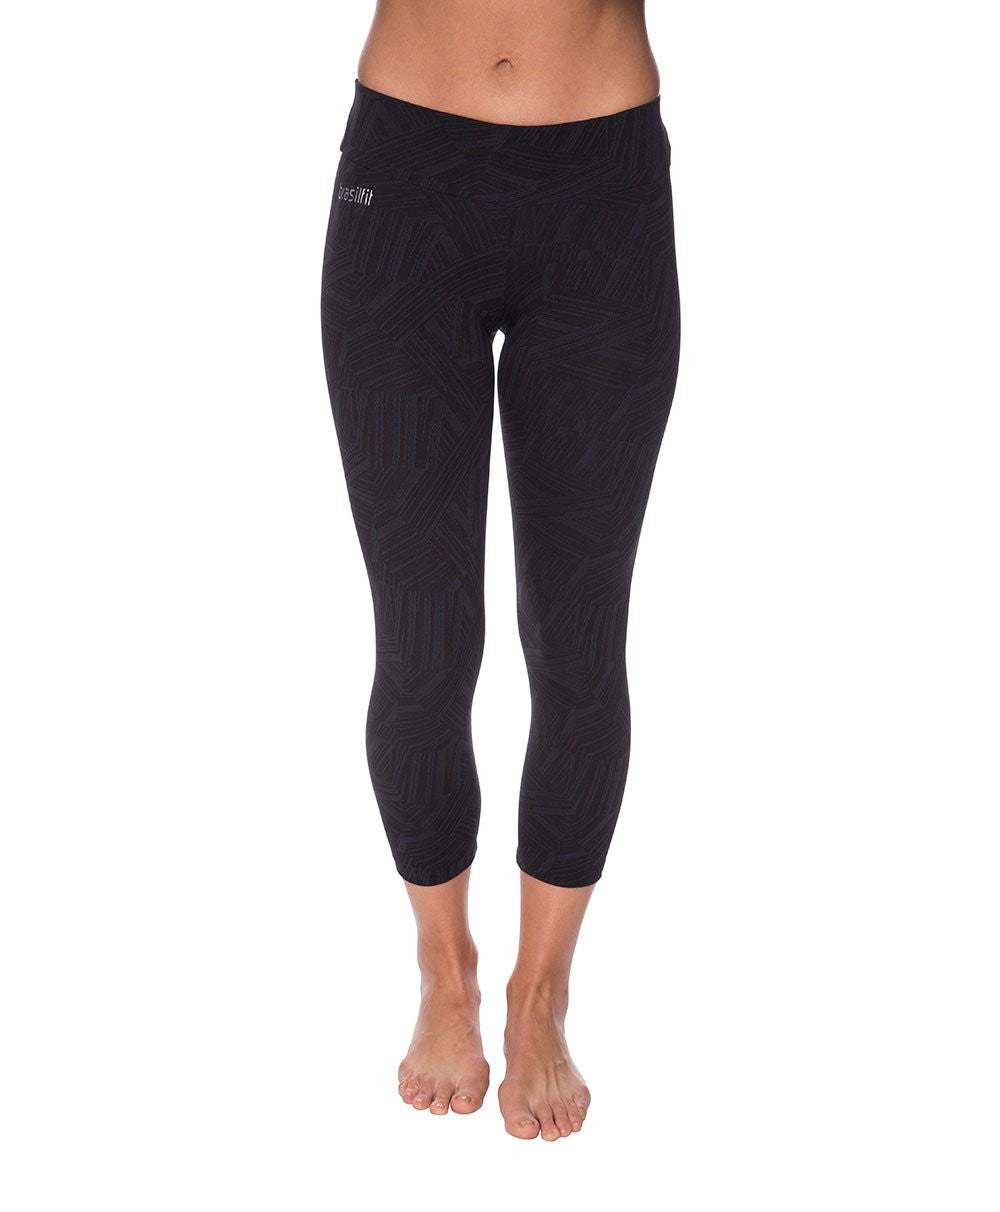 Side view product image for Brasilfit Faith Calf Length activewear leggings.  Faith leggings are part of our textured activewear legging collection that is focused on performance, high compression activewear.